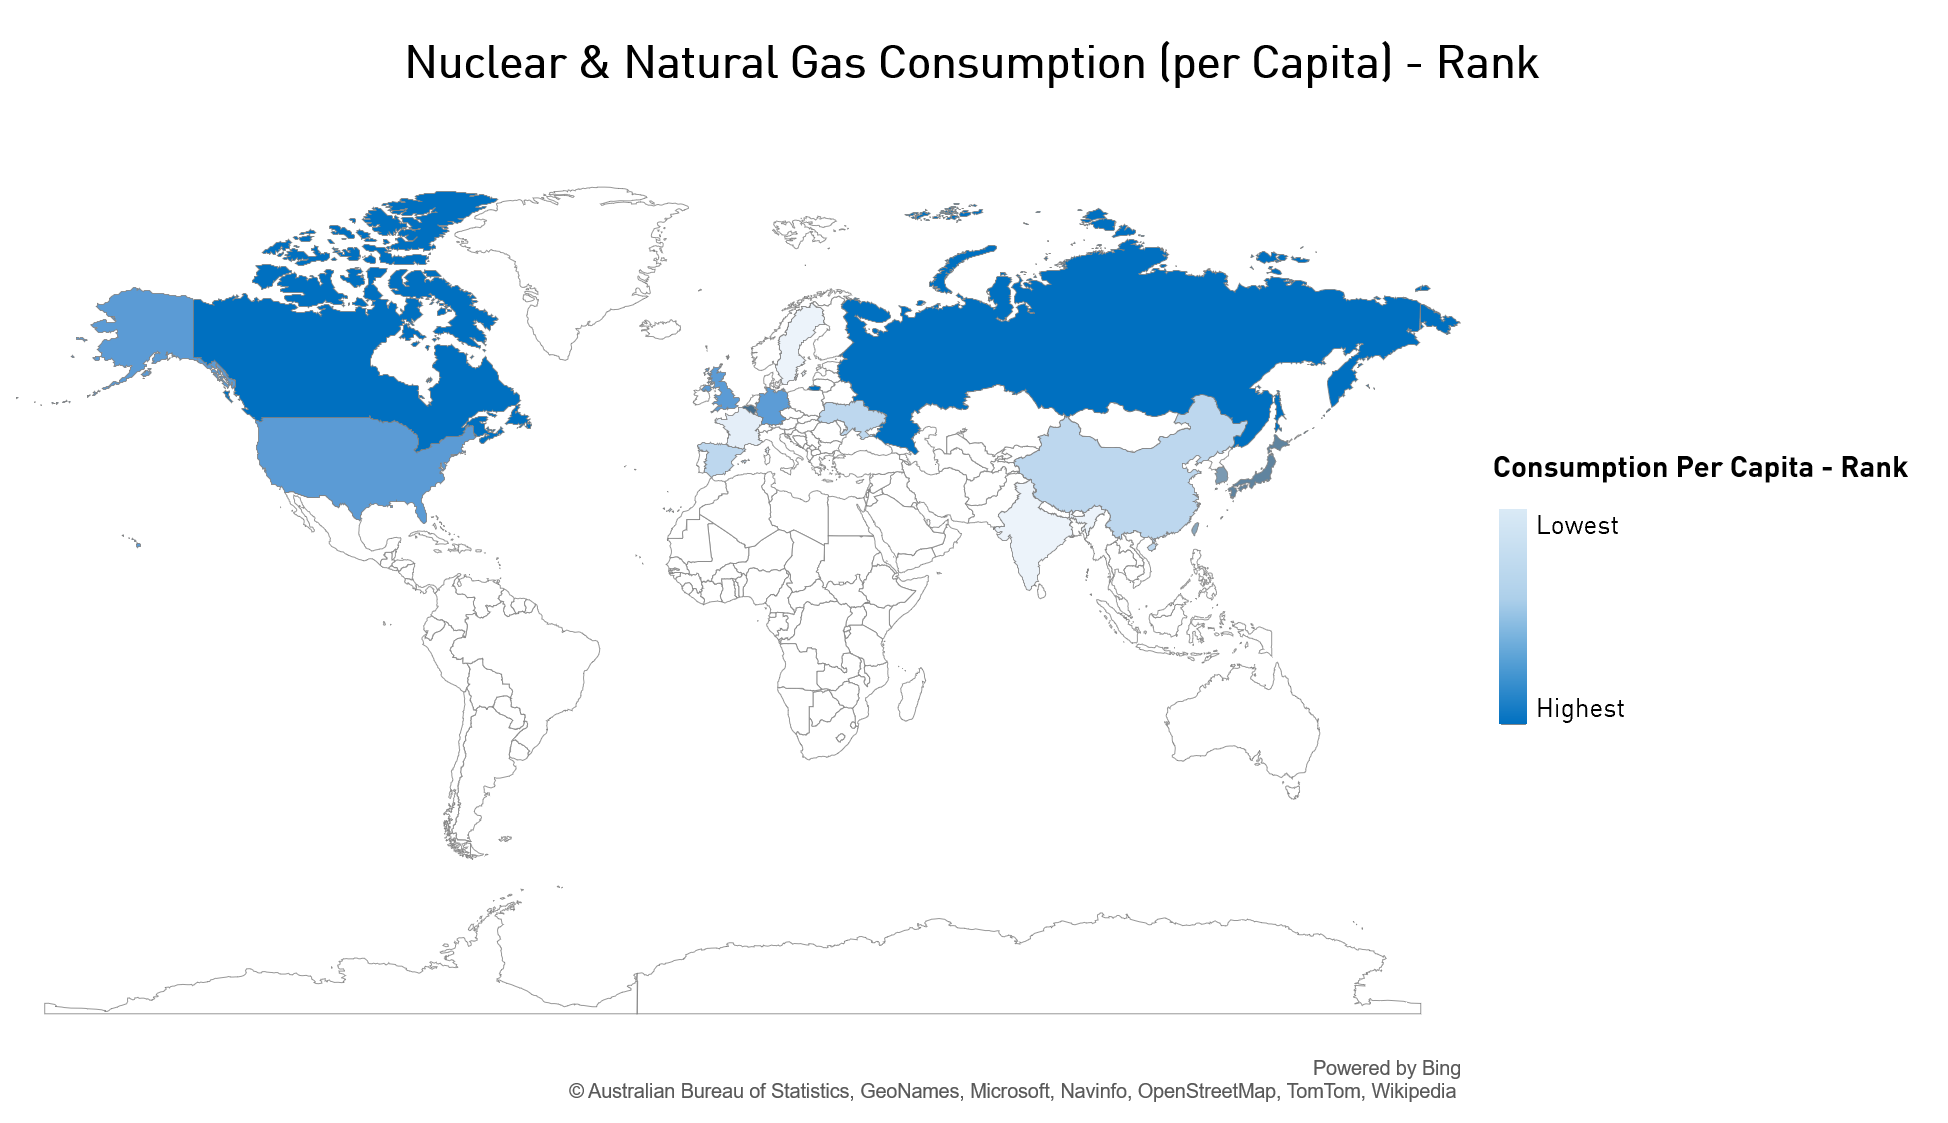 World Map showing Nuclear and Natural Gas Consumption per capita with Canada and Russia having the highest